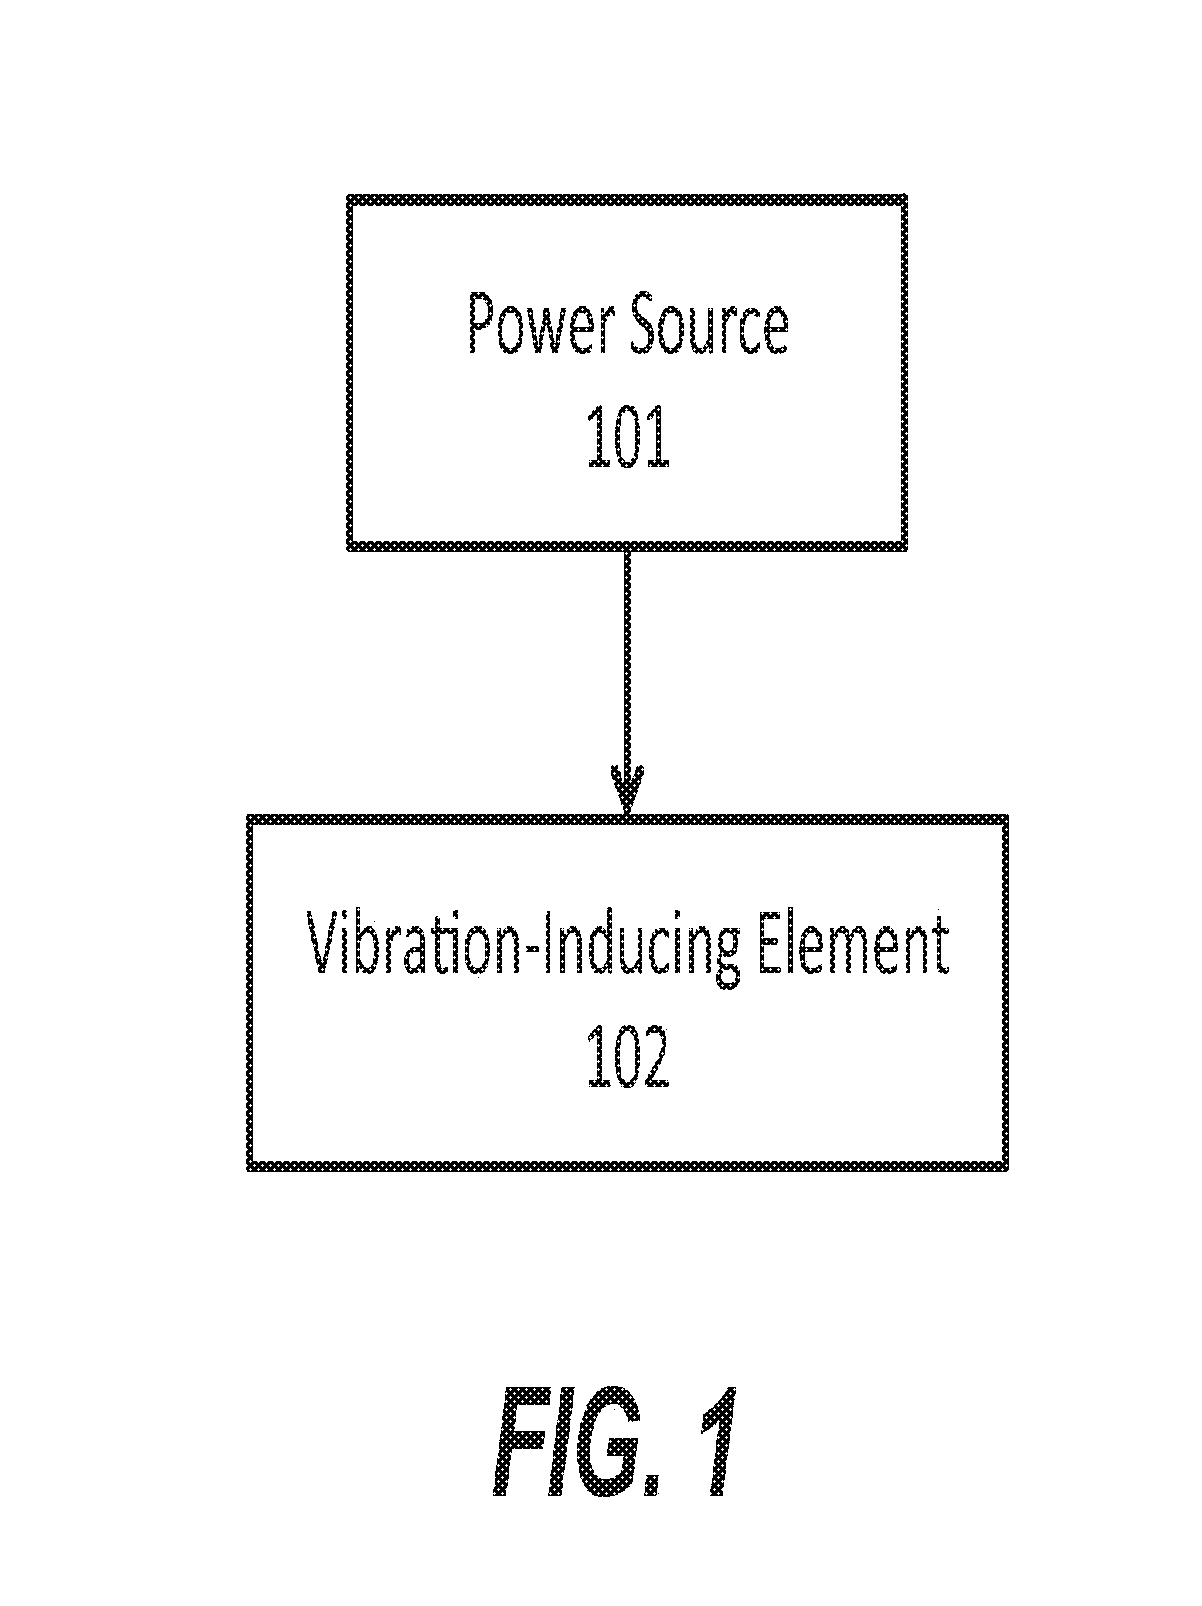 Device for mitigating motion sickness and other responses to inconsistent sensory information